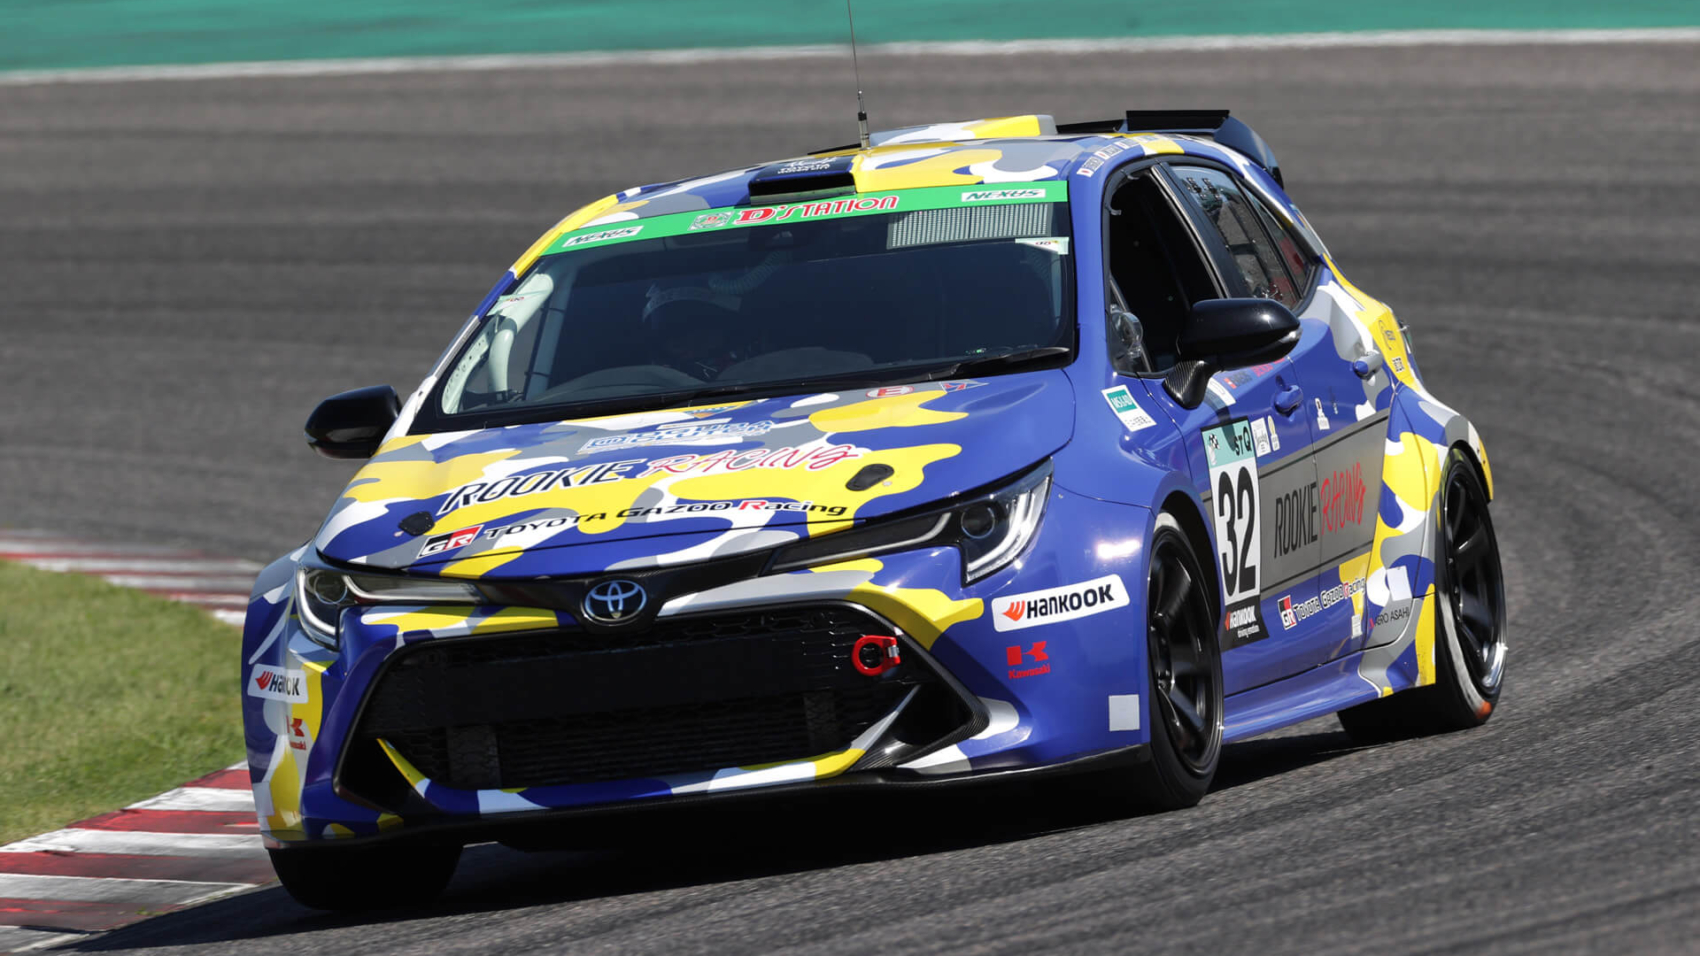 Toyota Corolla race car with hydrogen-fueled combustion engine